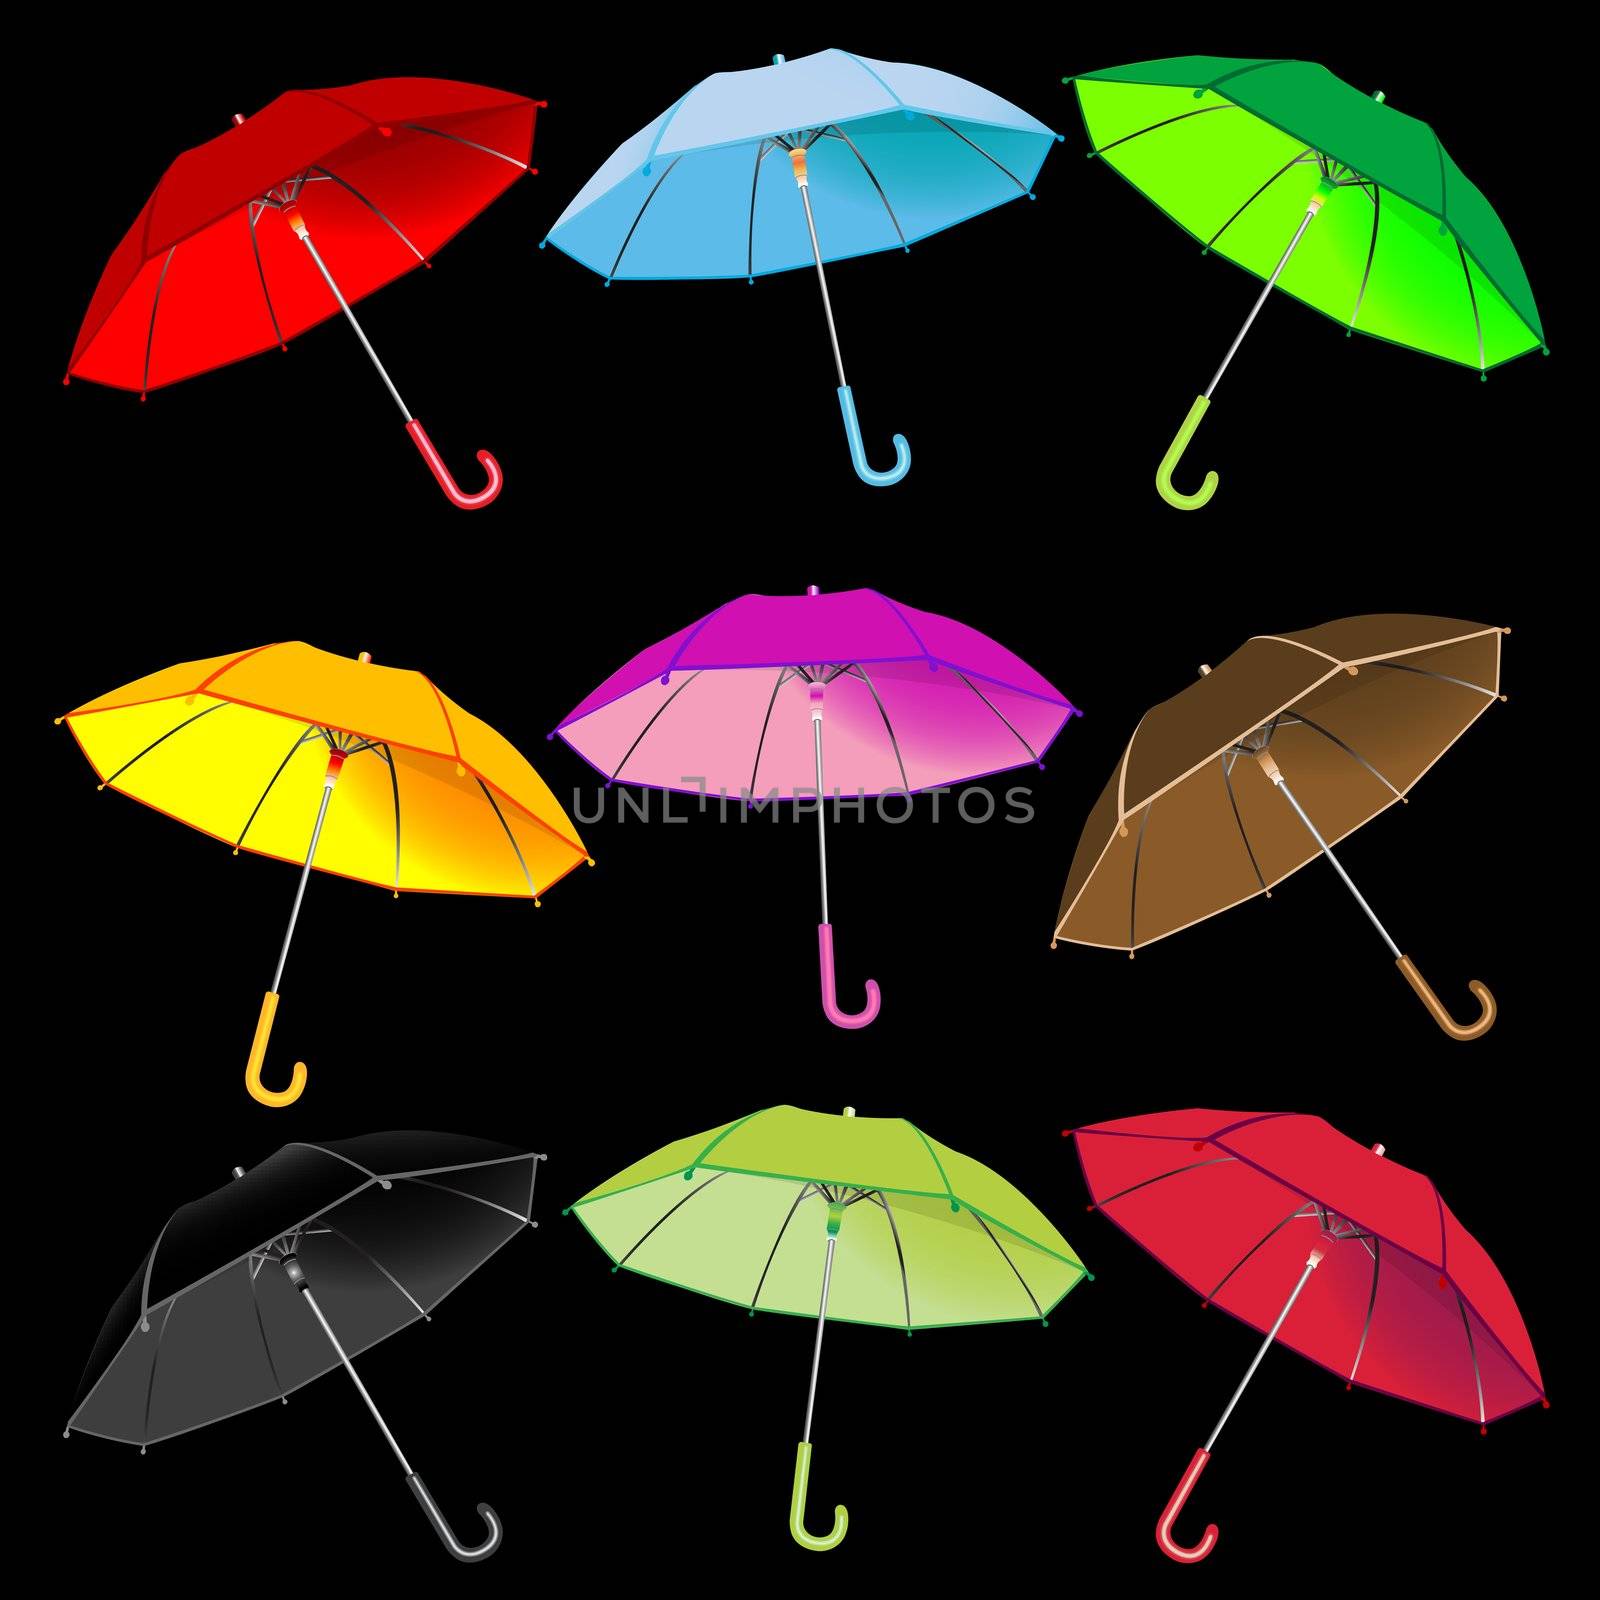 umbrellas collection against black background, abstract vector art illustration